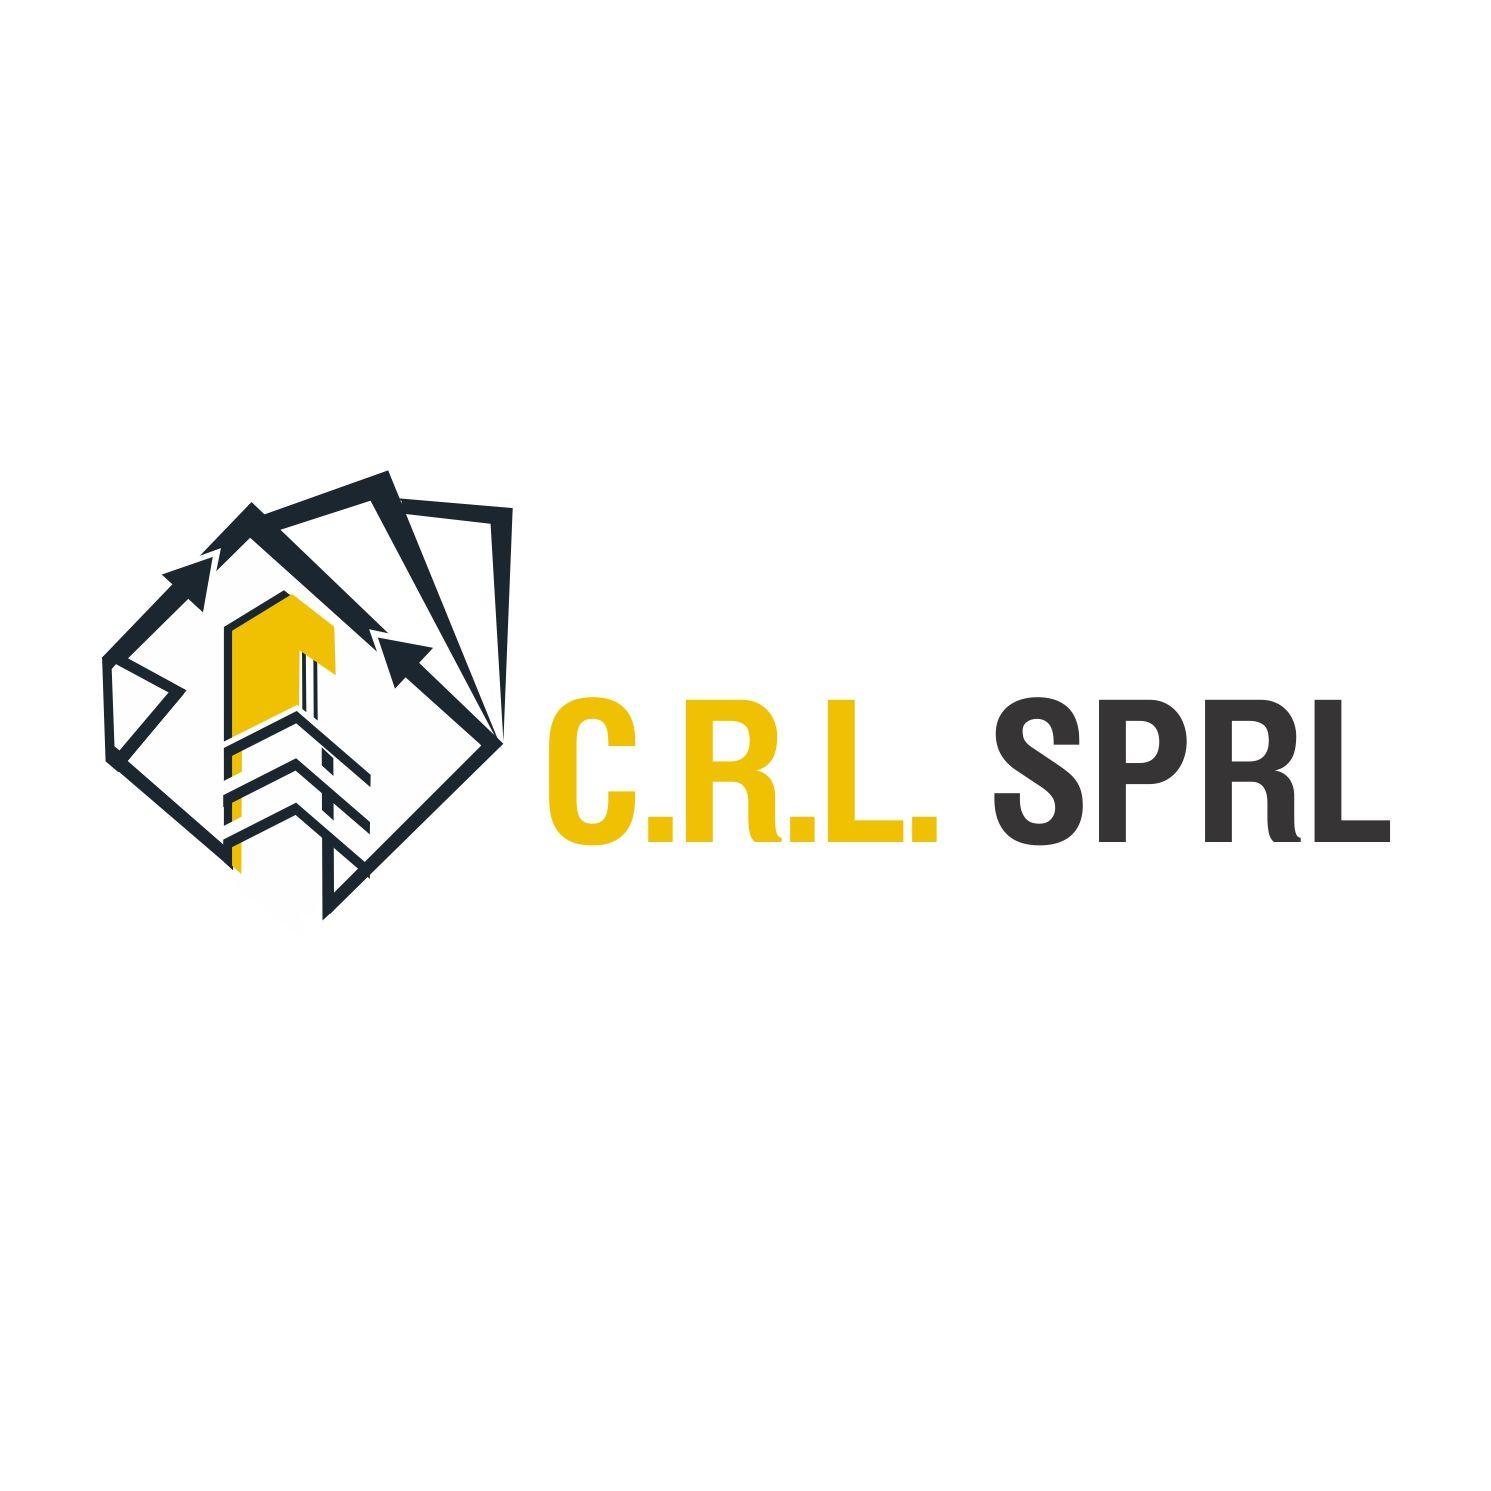 CRL Logo - Serious, Modern, Real Estate Logo Design for C.R.L. SPRL by creative ...